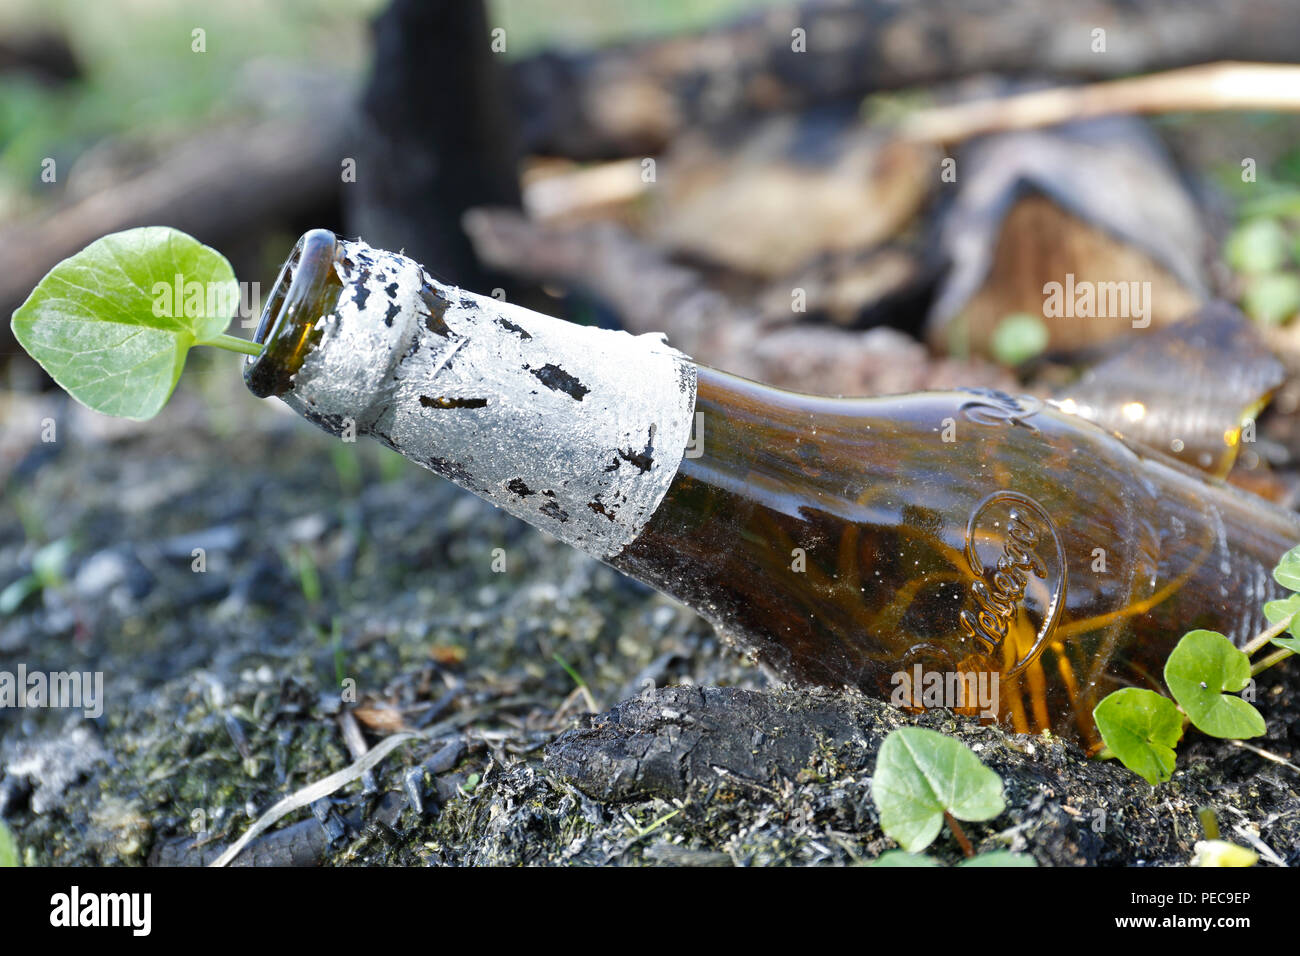 Garbage, glass bottle in nature, plant grows in beer bottle, Mecklenburg-Western Pomerania, Germany Stock Photo